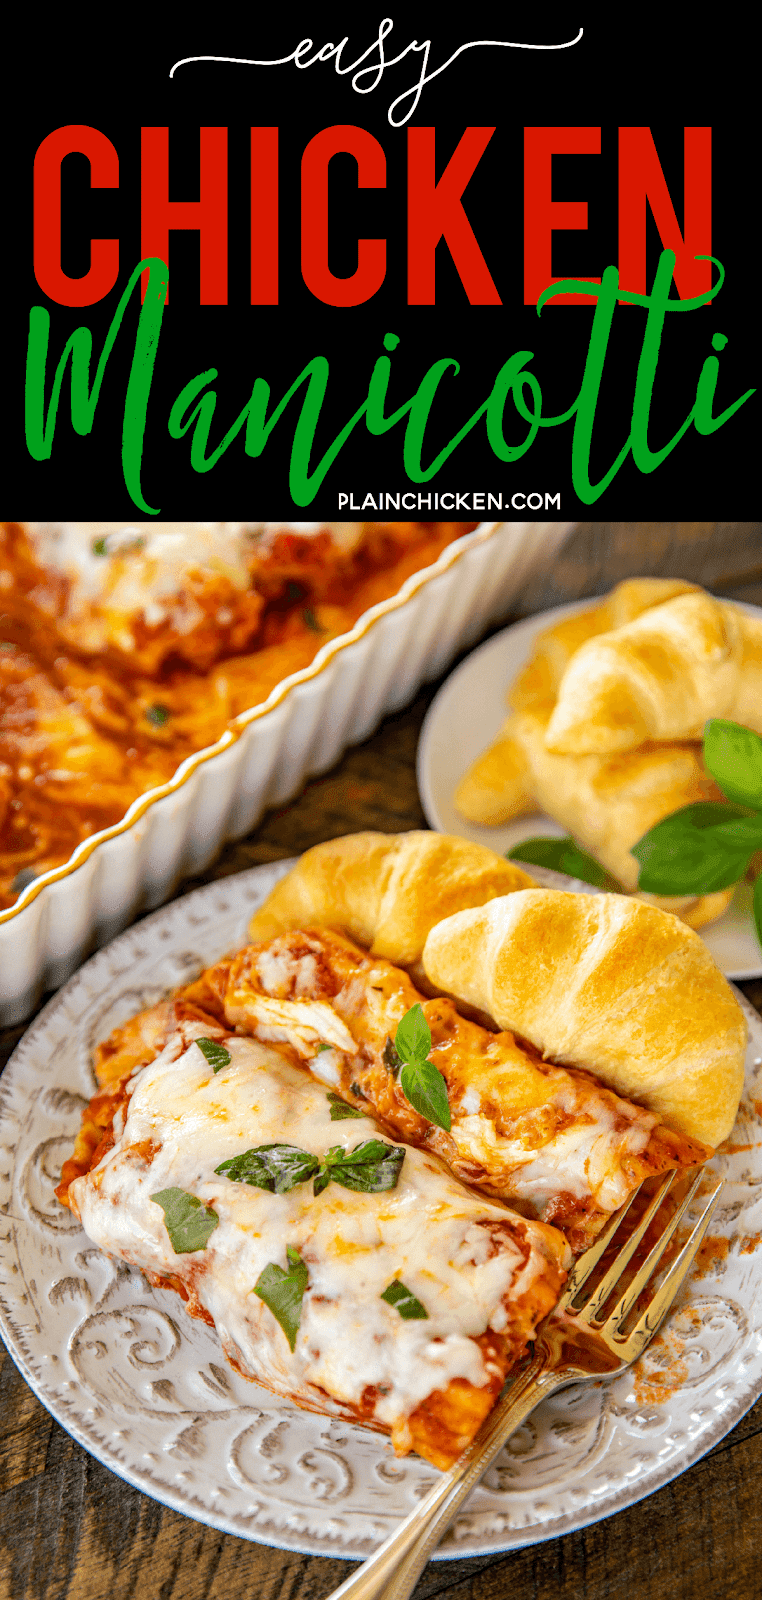 Easy Chicken Manicotti - so easy and seriously delicious! Everyone loved this easy pasta casserole and asked for seconds! YES! Manicotti noodles, chicken tenders, spaghetti sauce, water, garlic, Italian seasoning and mozzarella cheese. No need to boil the noodles or cook the chicken - it all bakes in the casserole dish. A family favorite! #pasta #casserole #manicotti #chickenrecipe